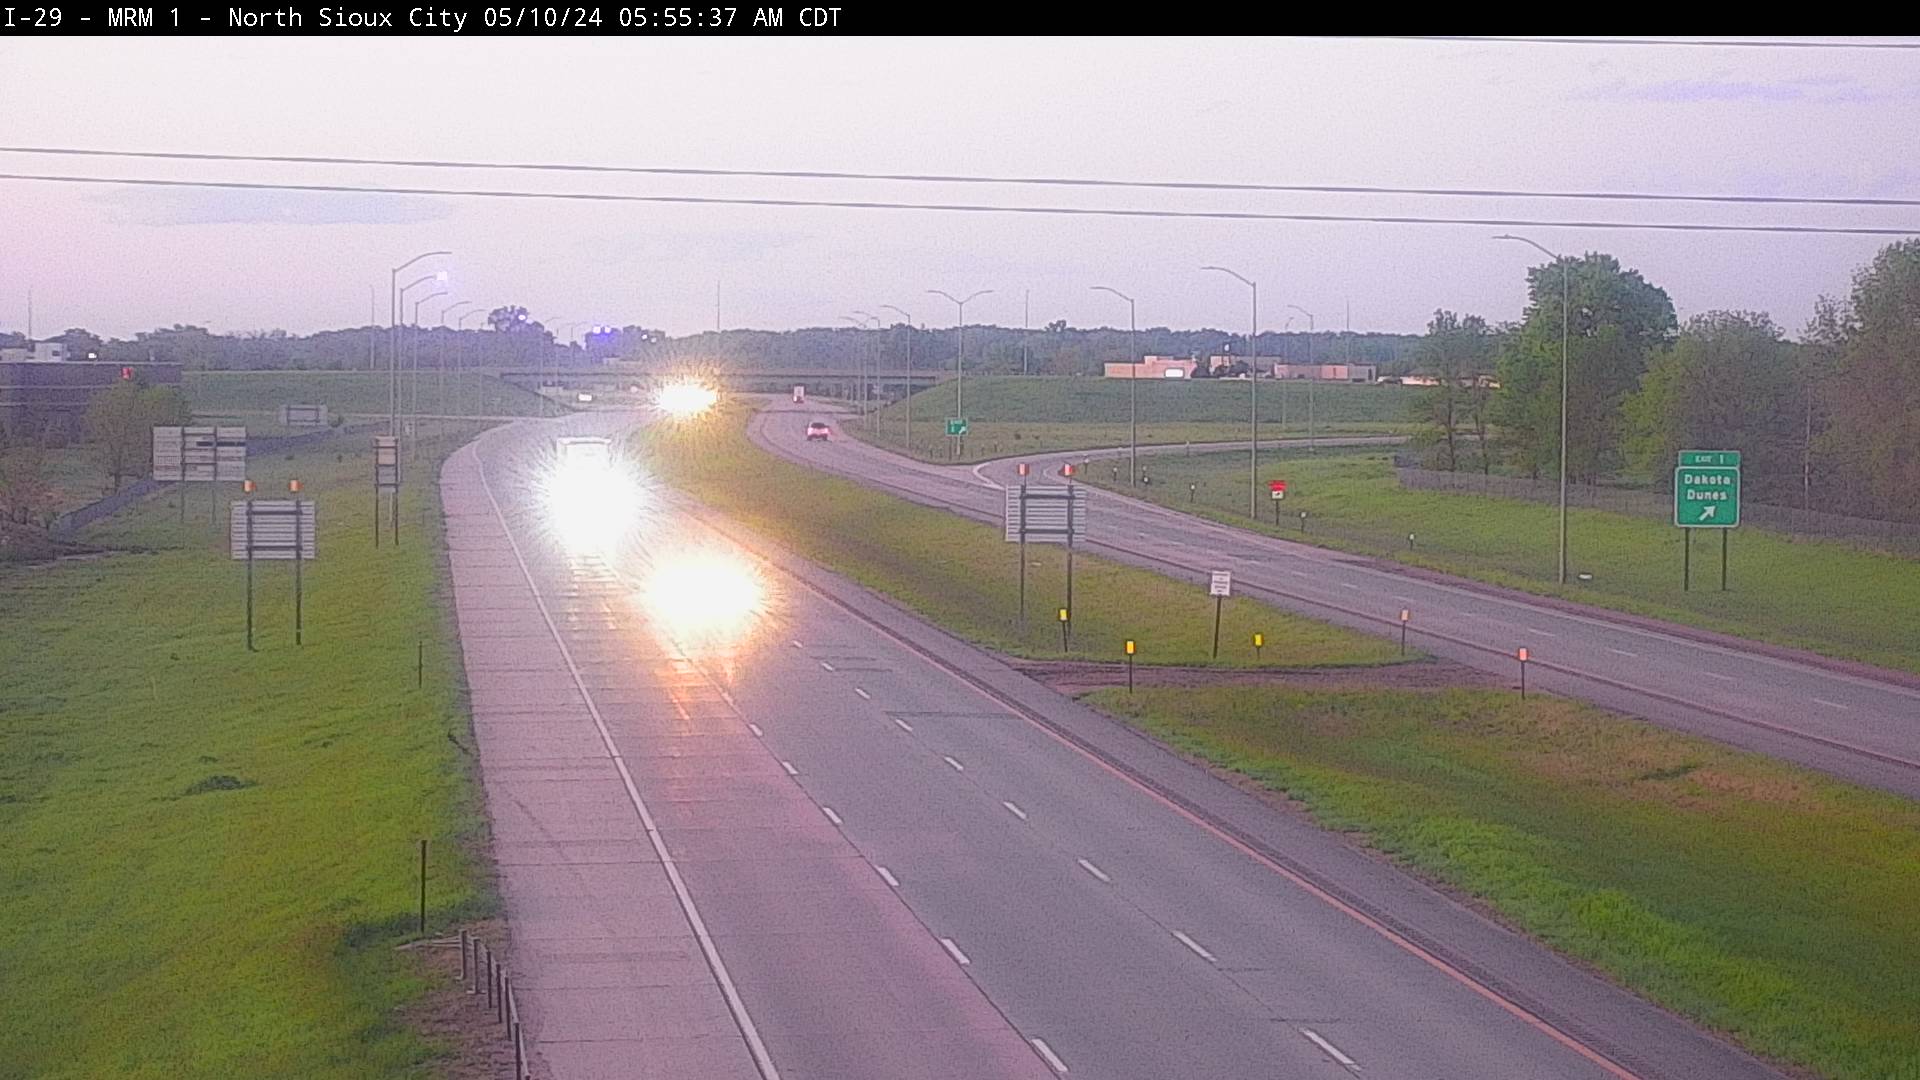 Traffic Cam 2 miles north of town along I-29 @ MP 2 - South Player